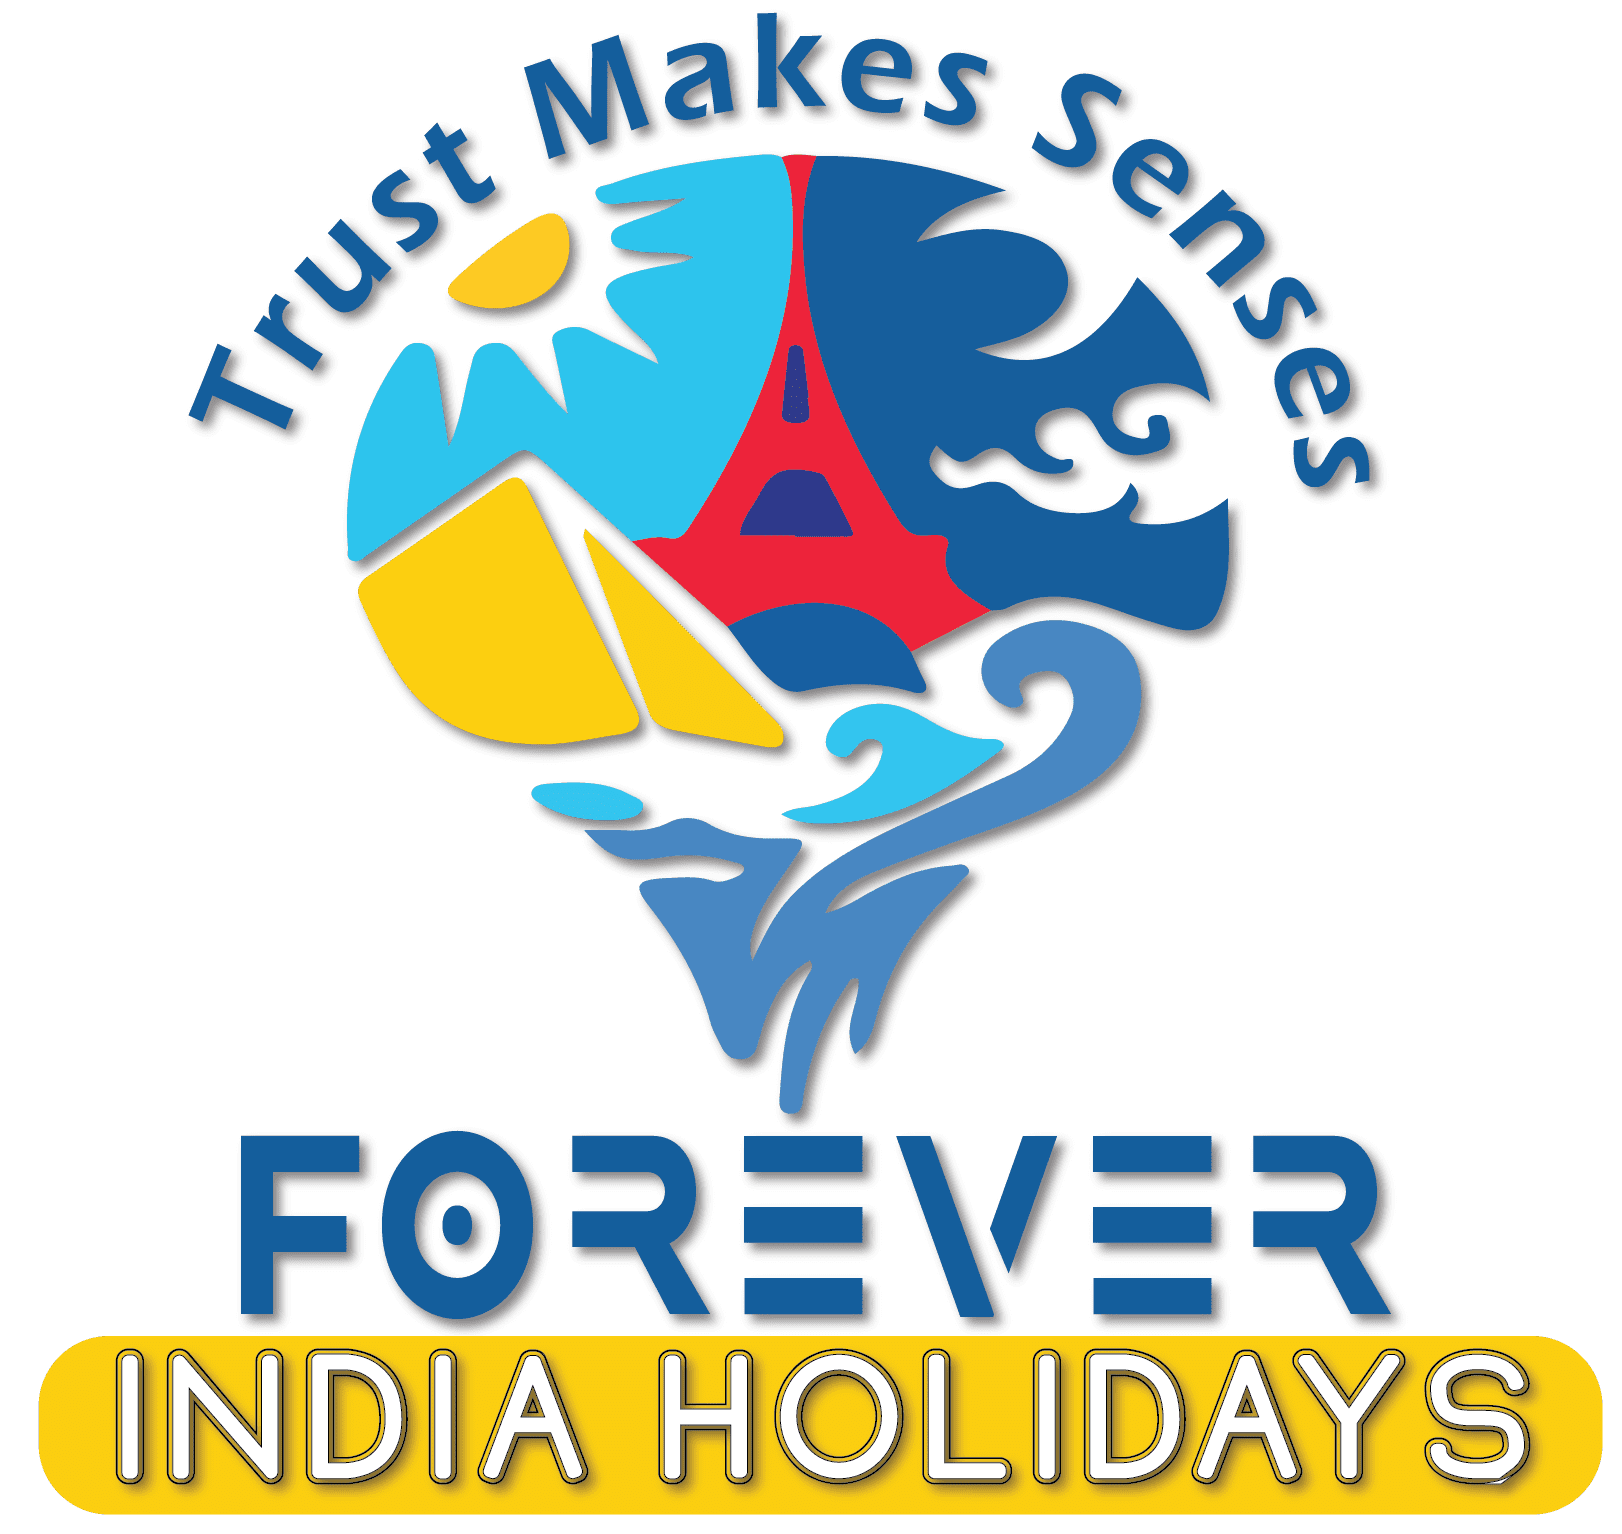 BlackCoders Client Forever India Holidays